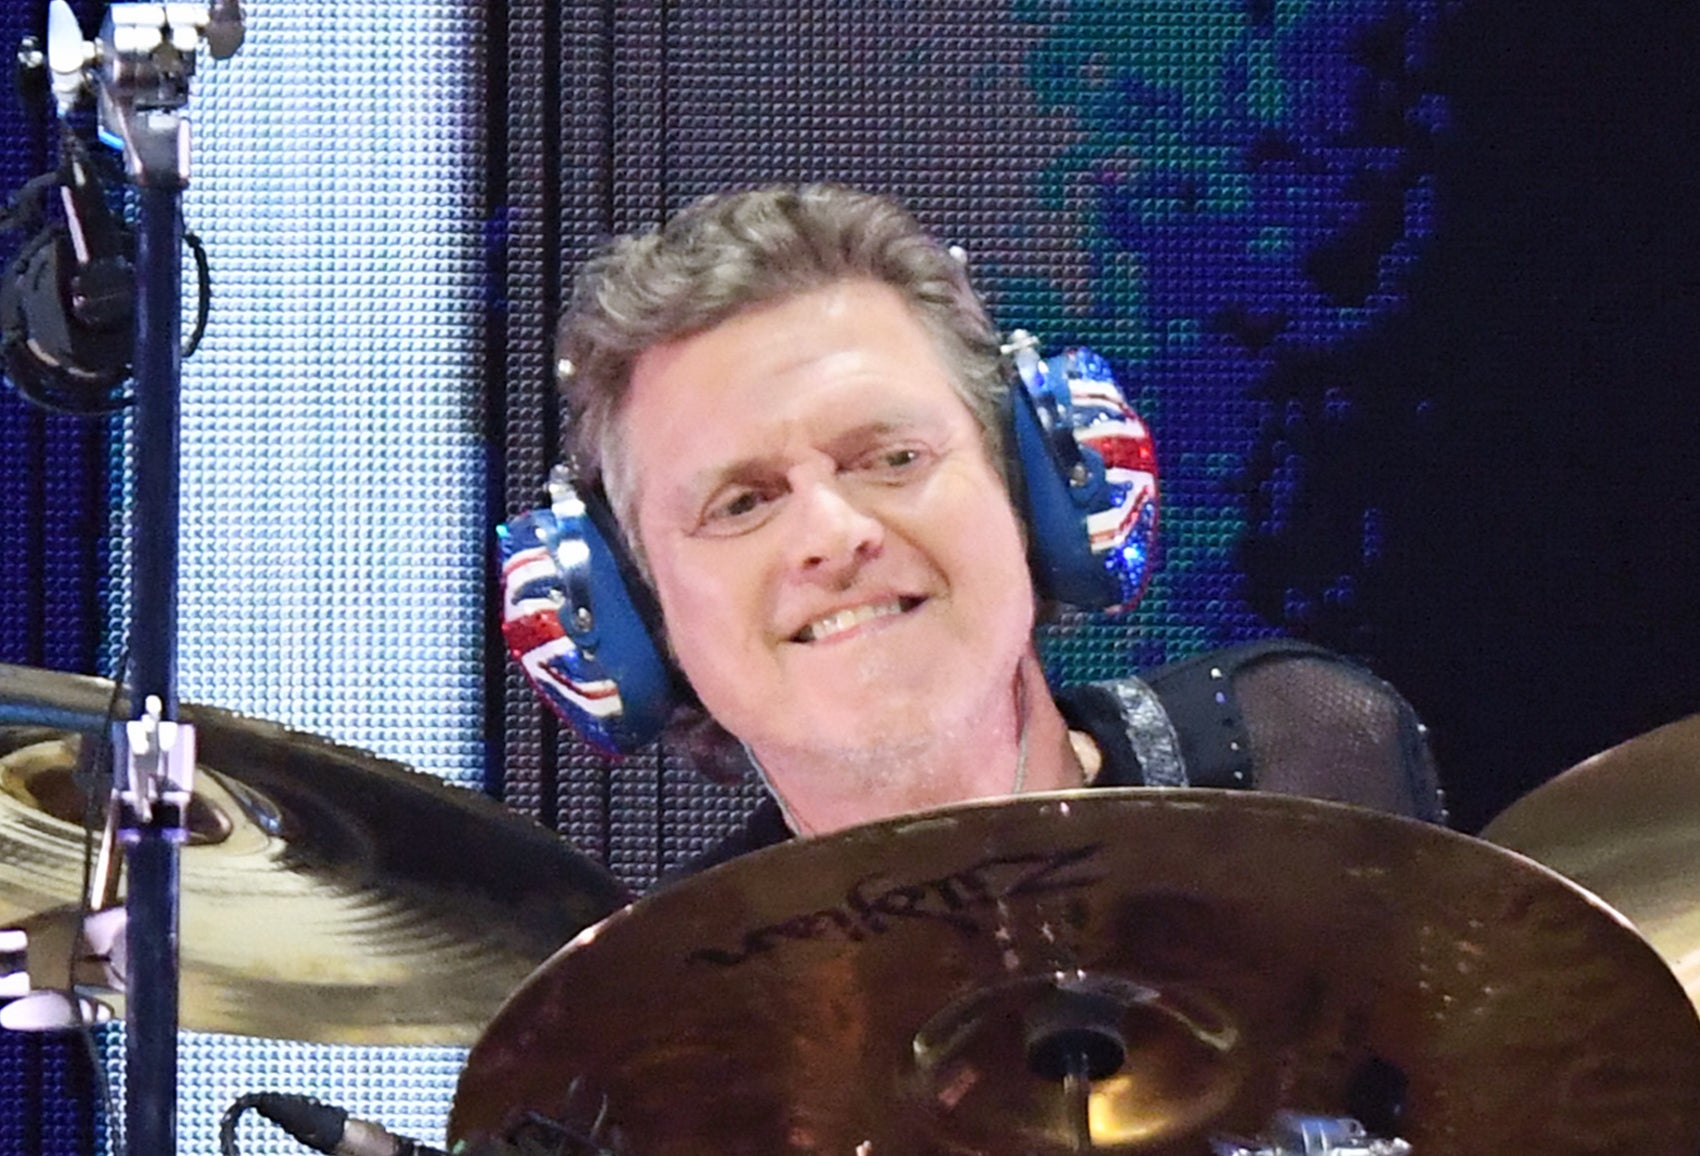 Rick Allen had lost one of his arms after a car crash in December 1984